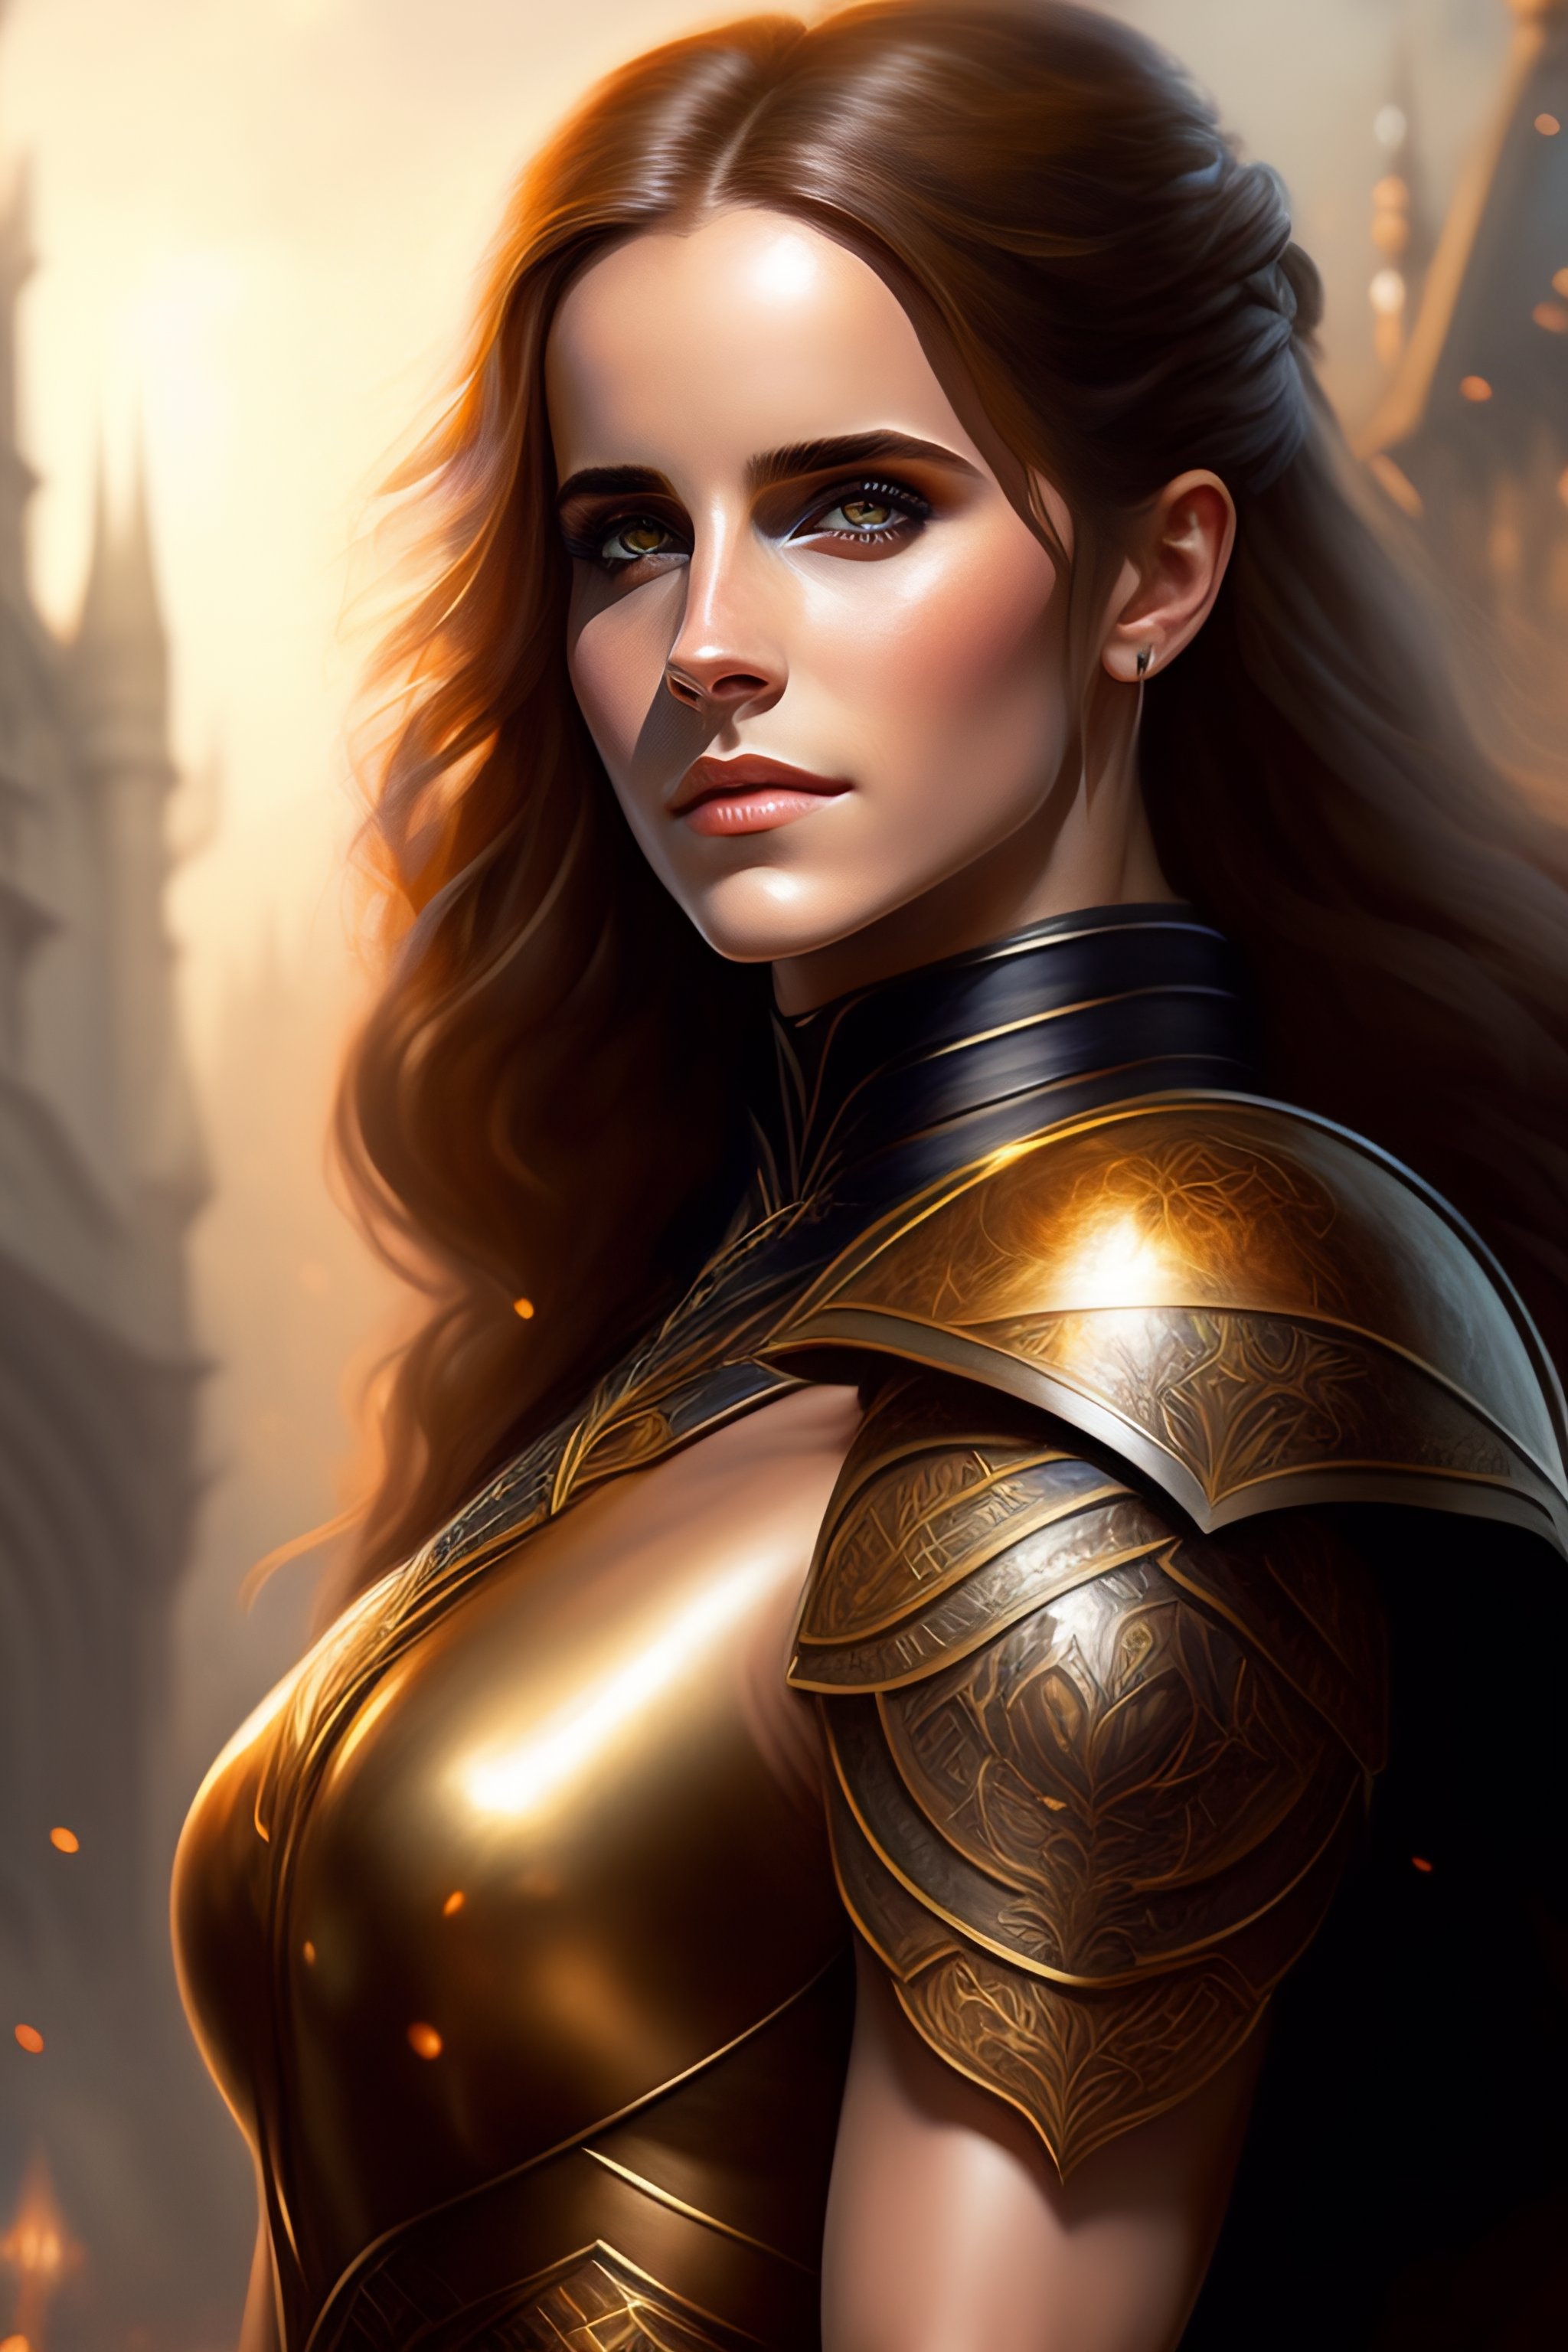 Lexica - Emma watson Muscular and powerful medieval knight woman ...